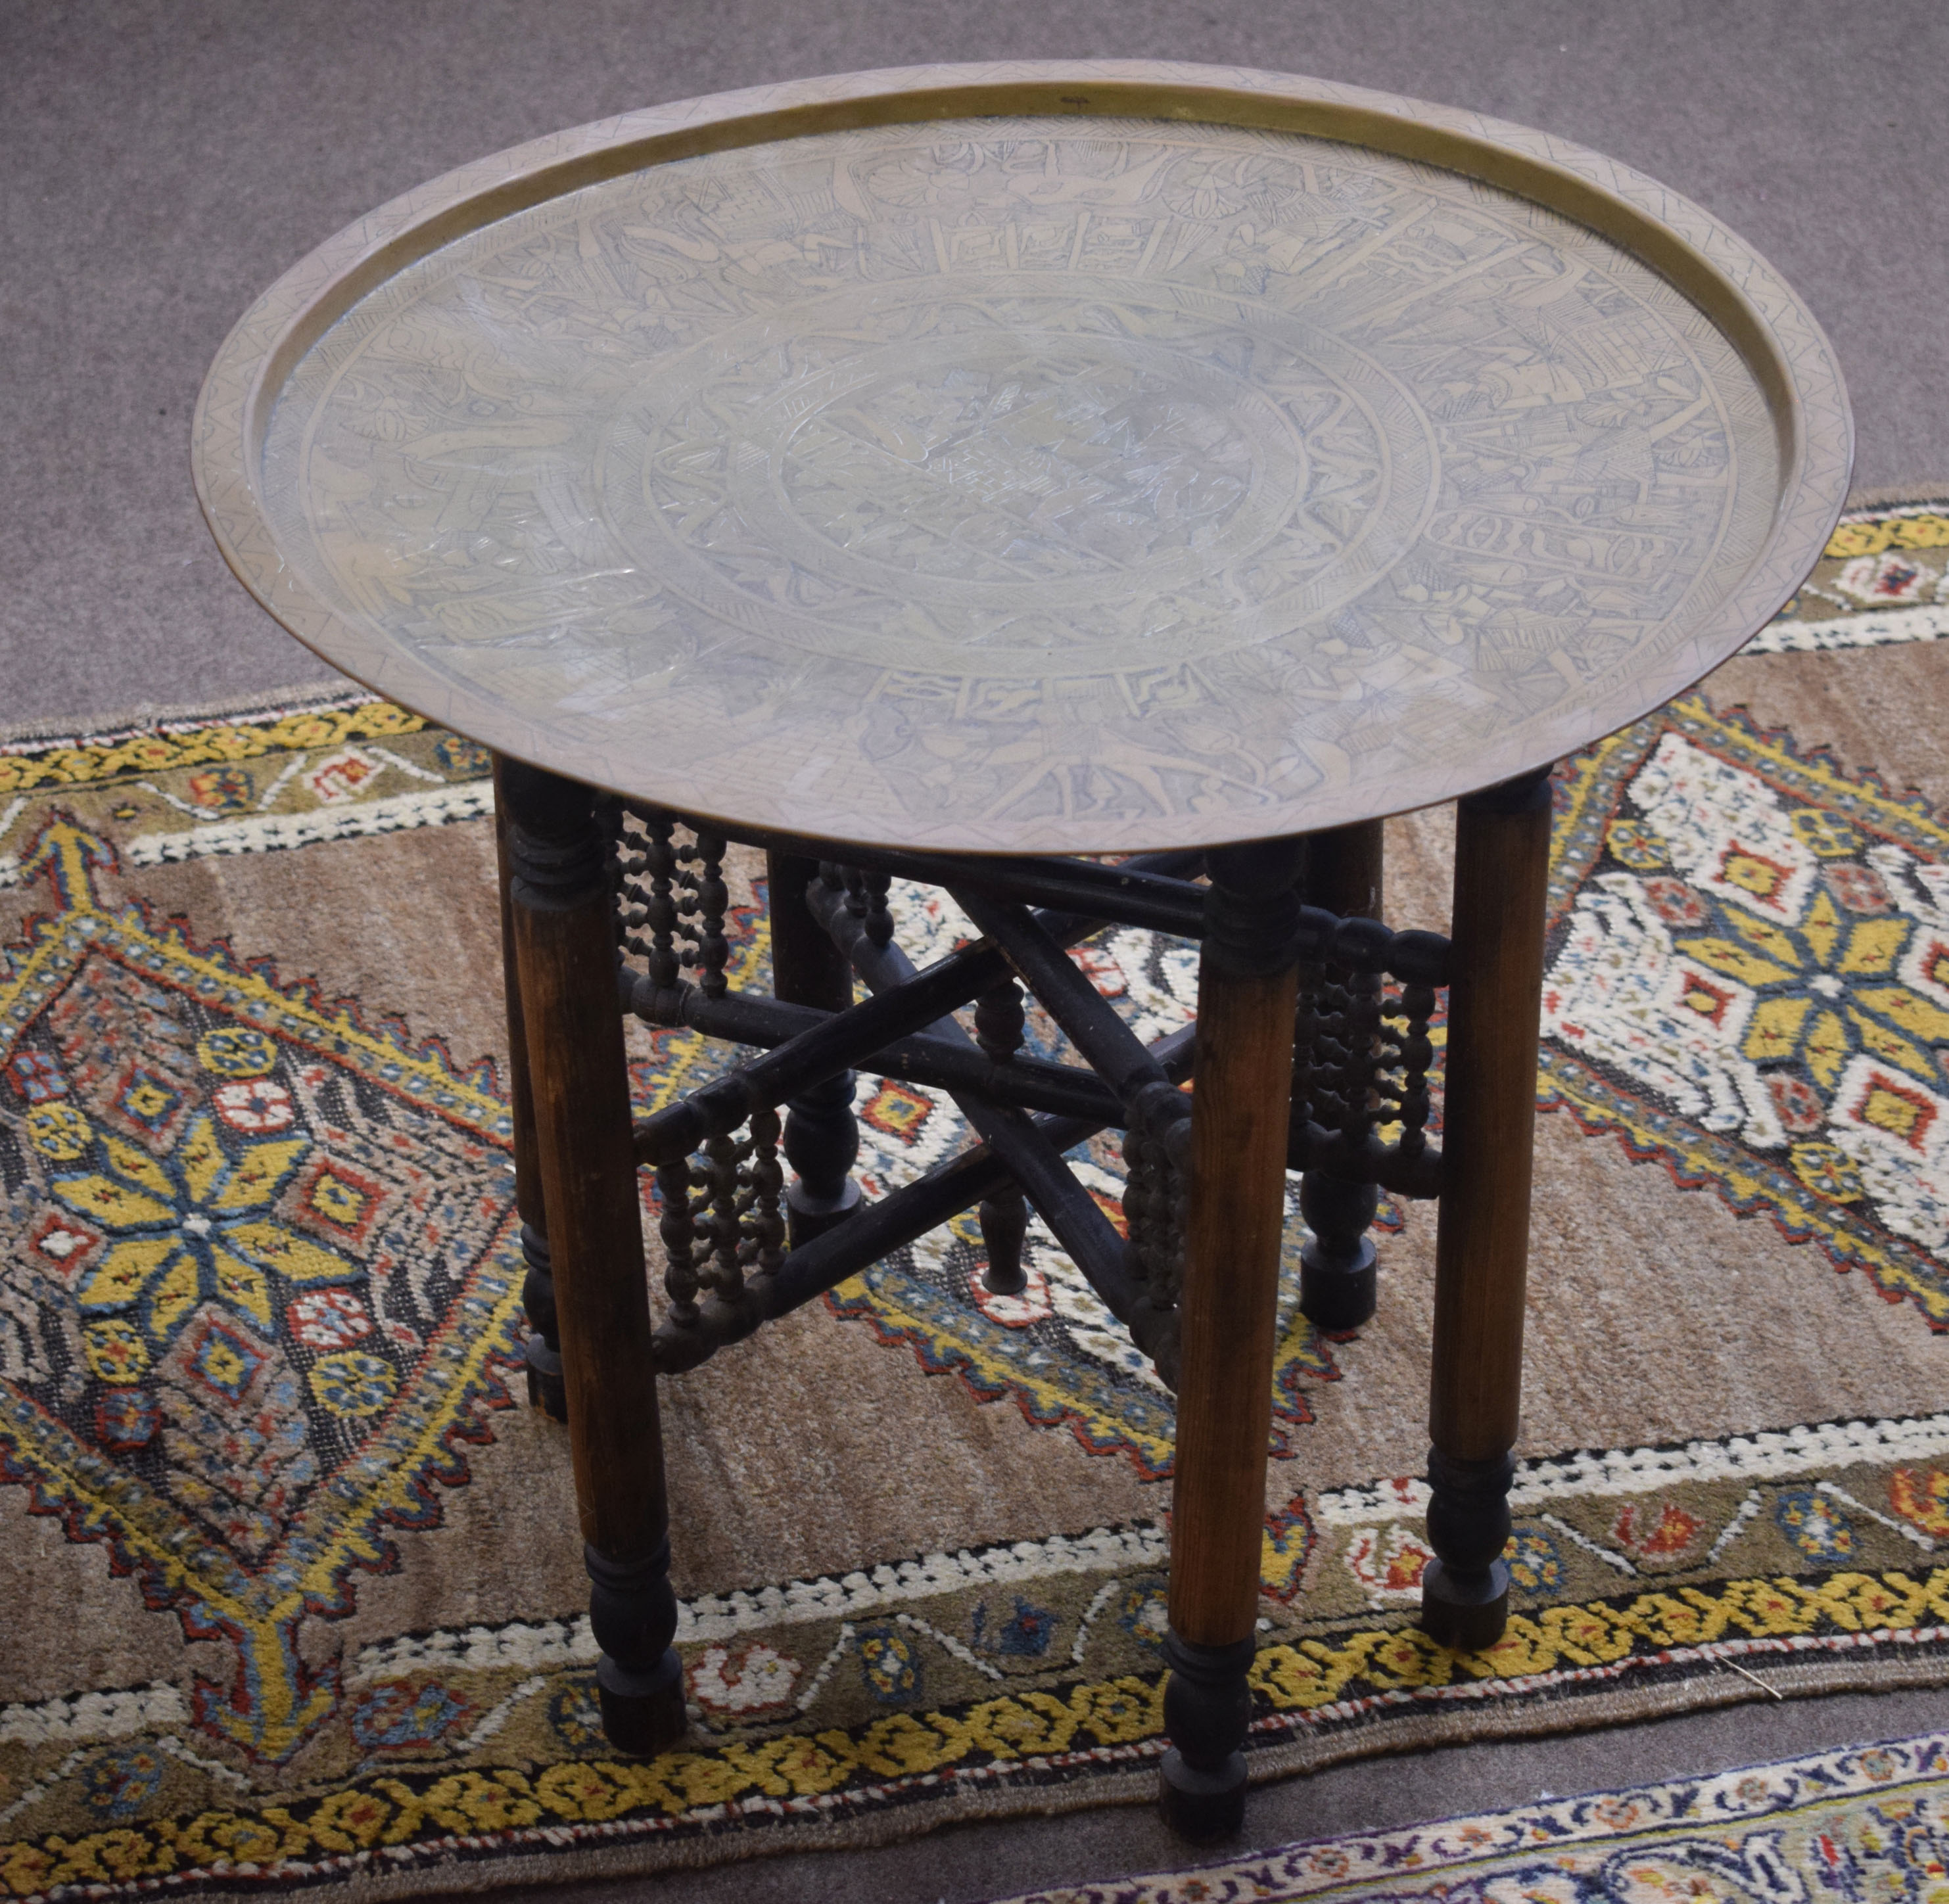 Early 20th century Benares table with brass top and folding support^ 63cm diam